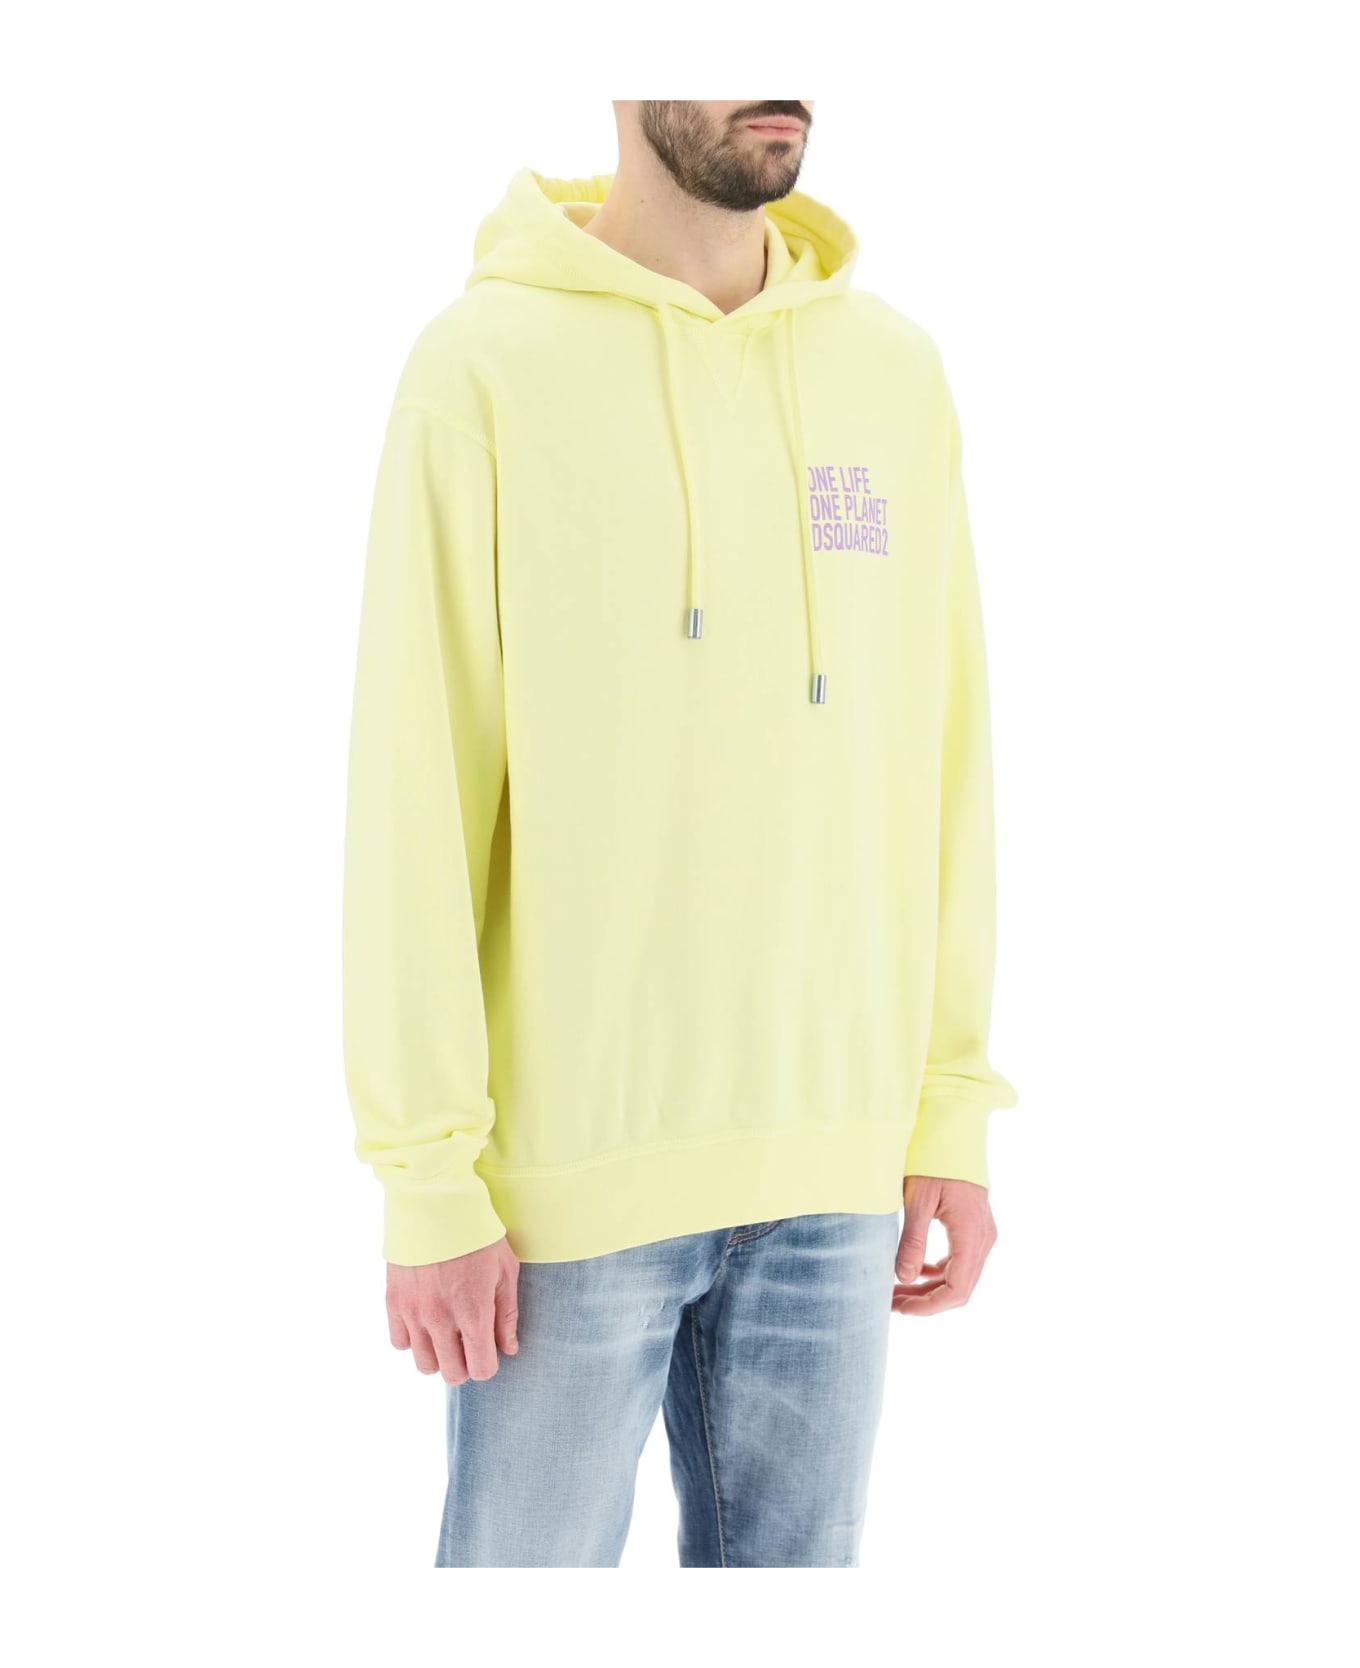 Dsquared2 One Life One Planet Hoodie - DUSTY LEMONADE (Yellow) フリース